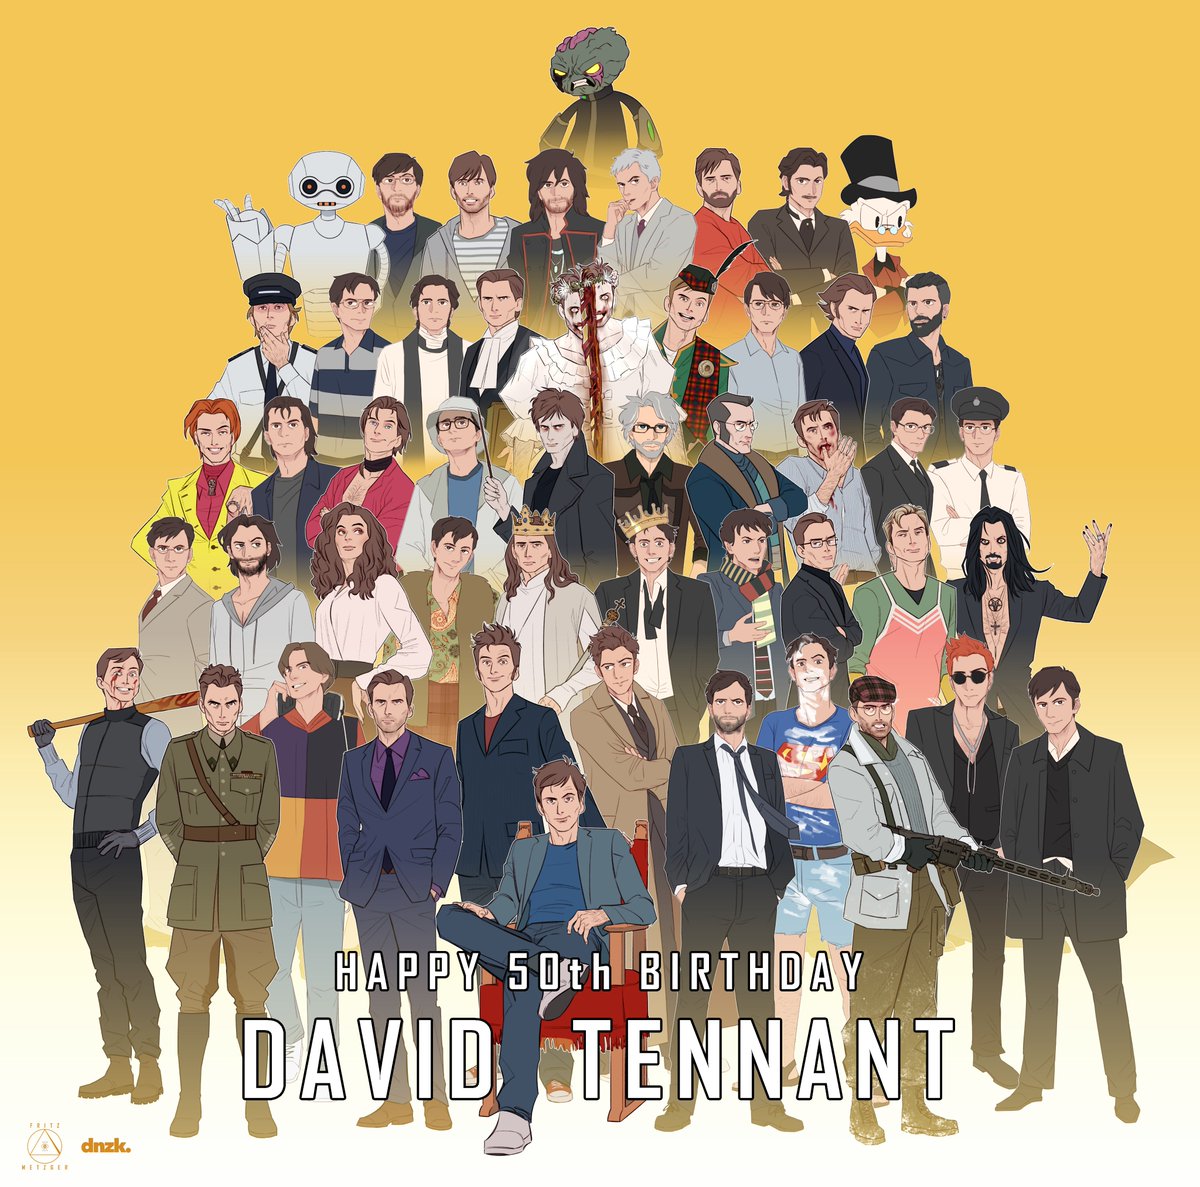 Happy Birthday to the one and only David Tennant!
My mate @SrFritzofTARDIS and I are working nonstop for this massive collab! (Thanks for the help, mwah!)

#HappyBirthdayDavidTennant #DavidTennant #FANART